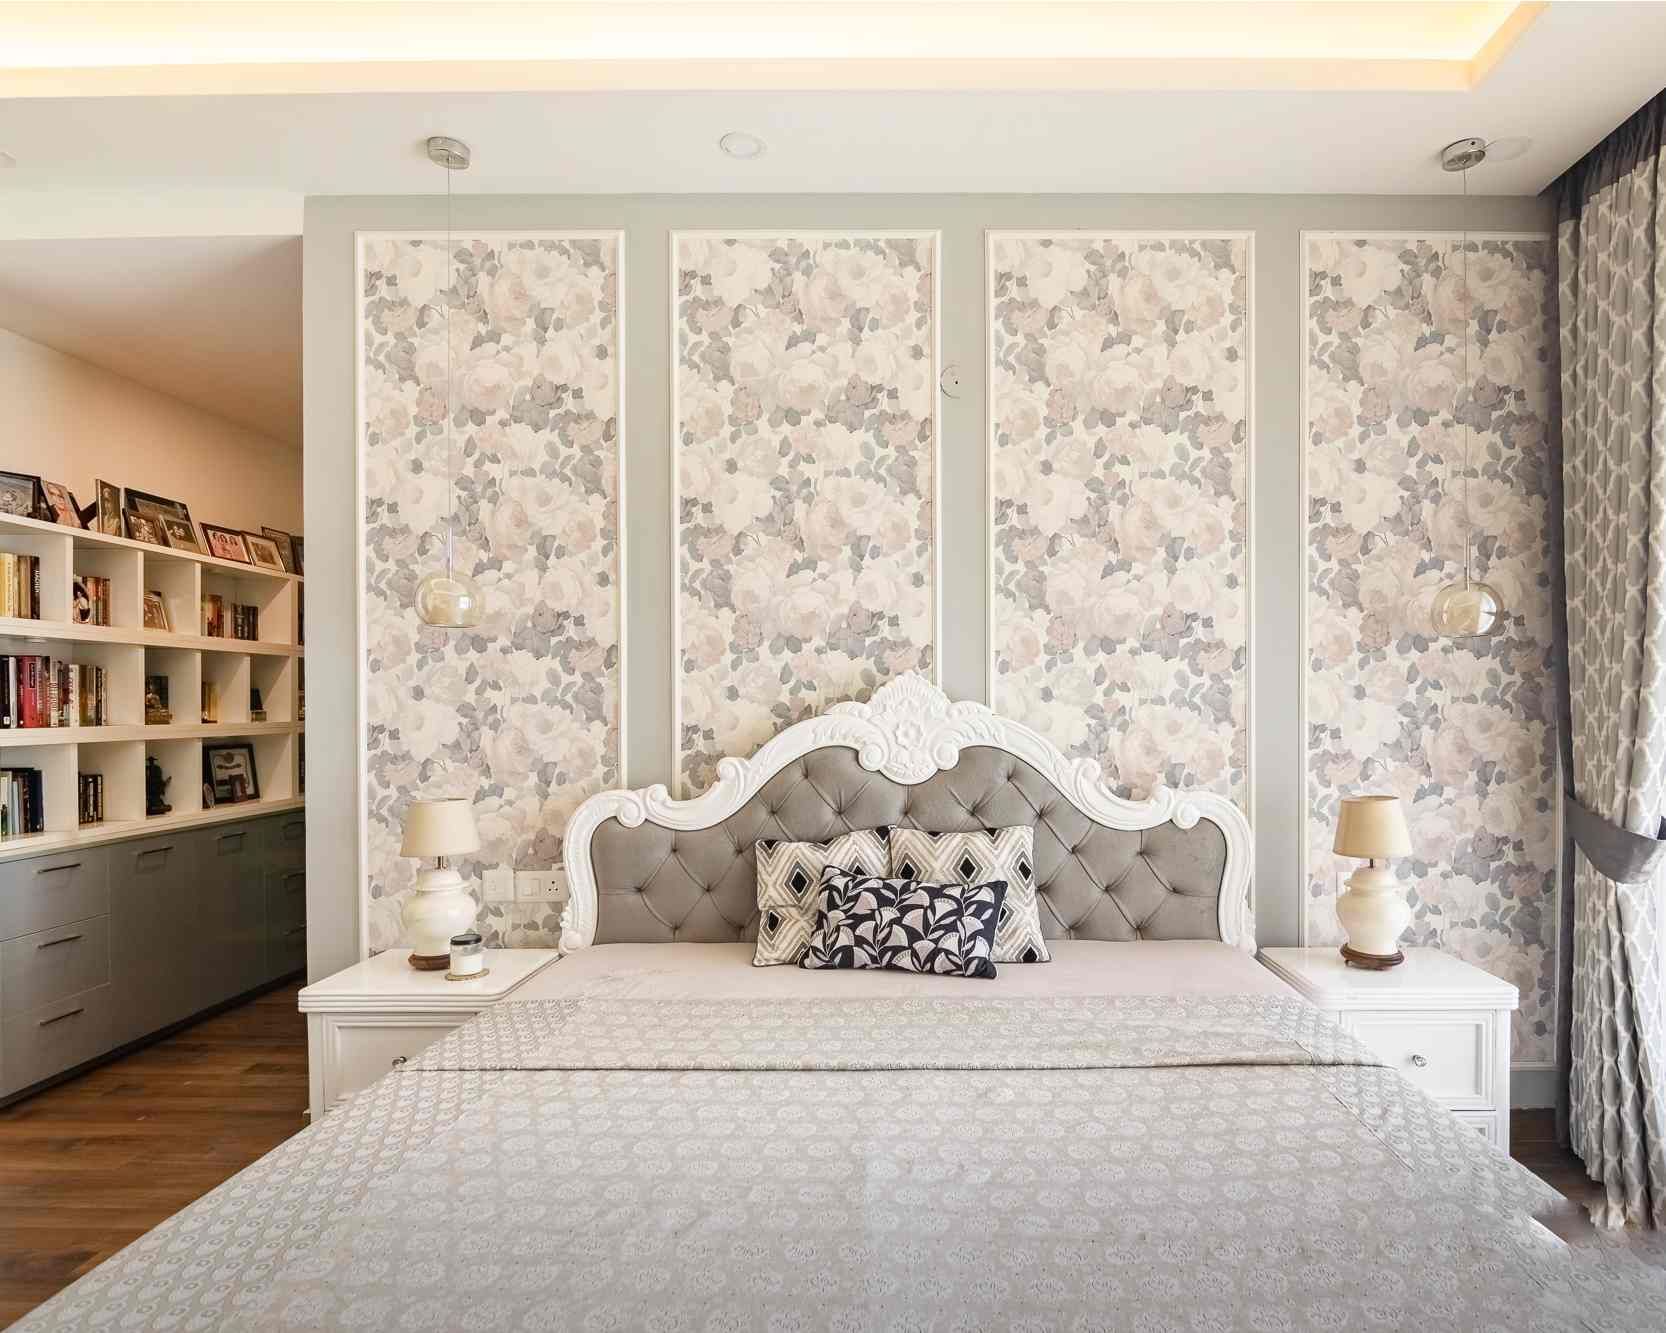 Classic White And Grey Bedroom Wall Design With Trims